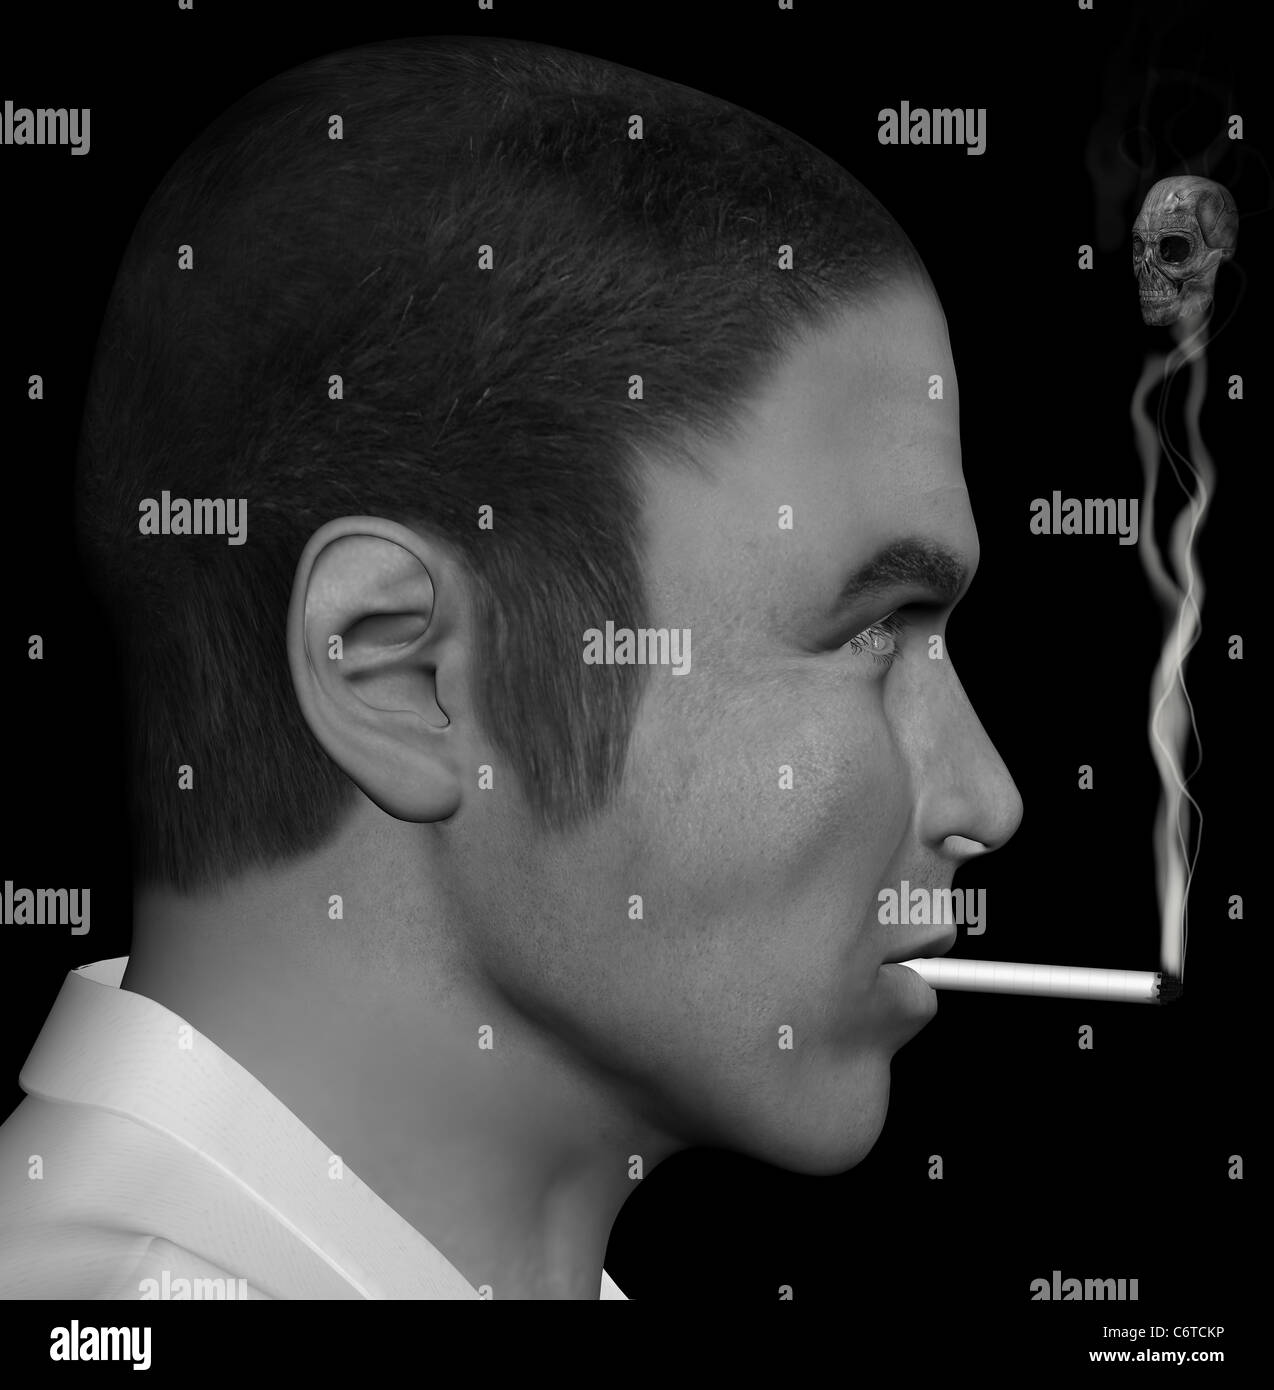 Man smoking a cigarette with skull forming through the smoke. 3d illustration. Stock Photo